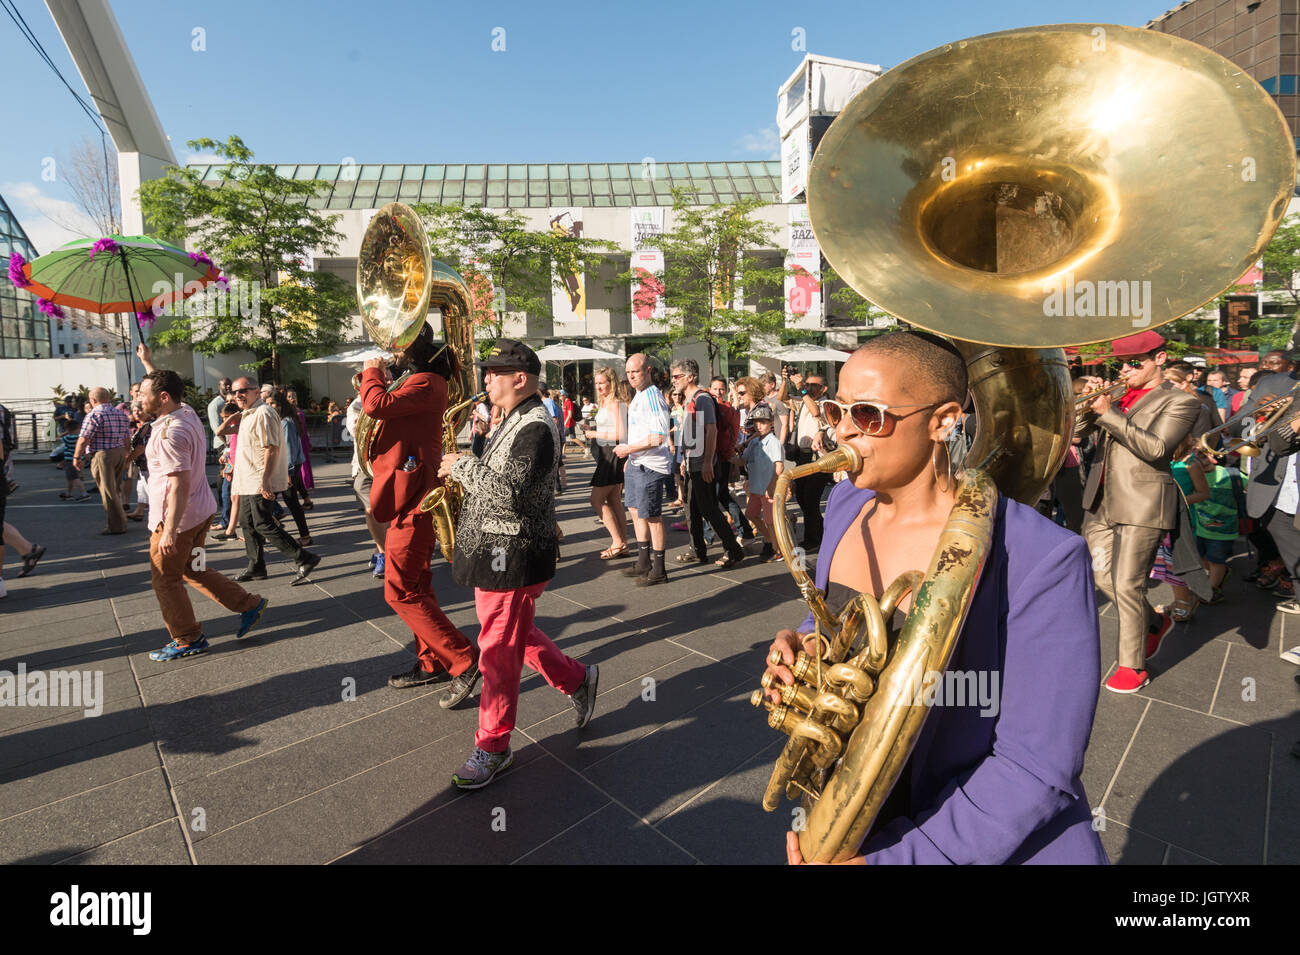 Montreal, 8 July 2017: Julie Richard from Urban Science Brass Band playing the Sousaphone at the Montreal Jazz Festival Stock Photo